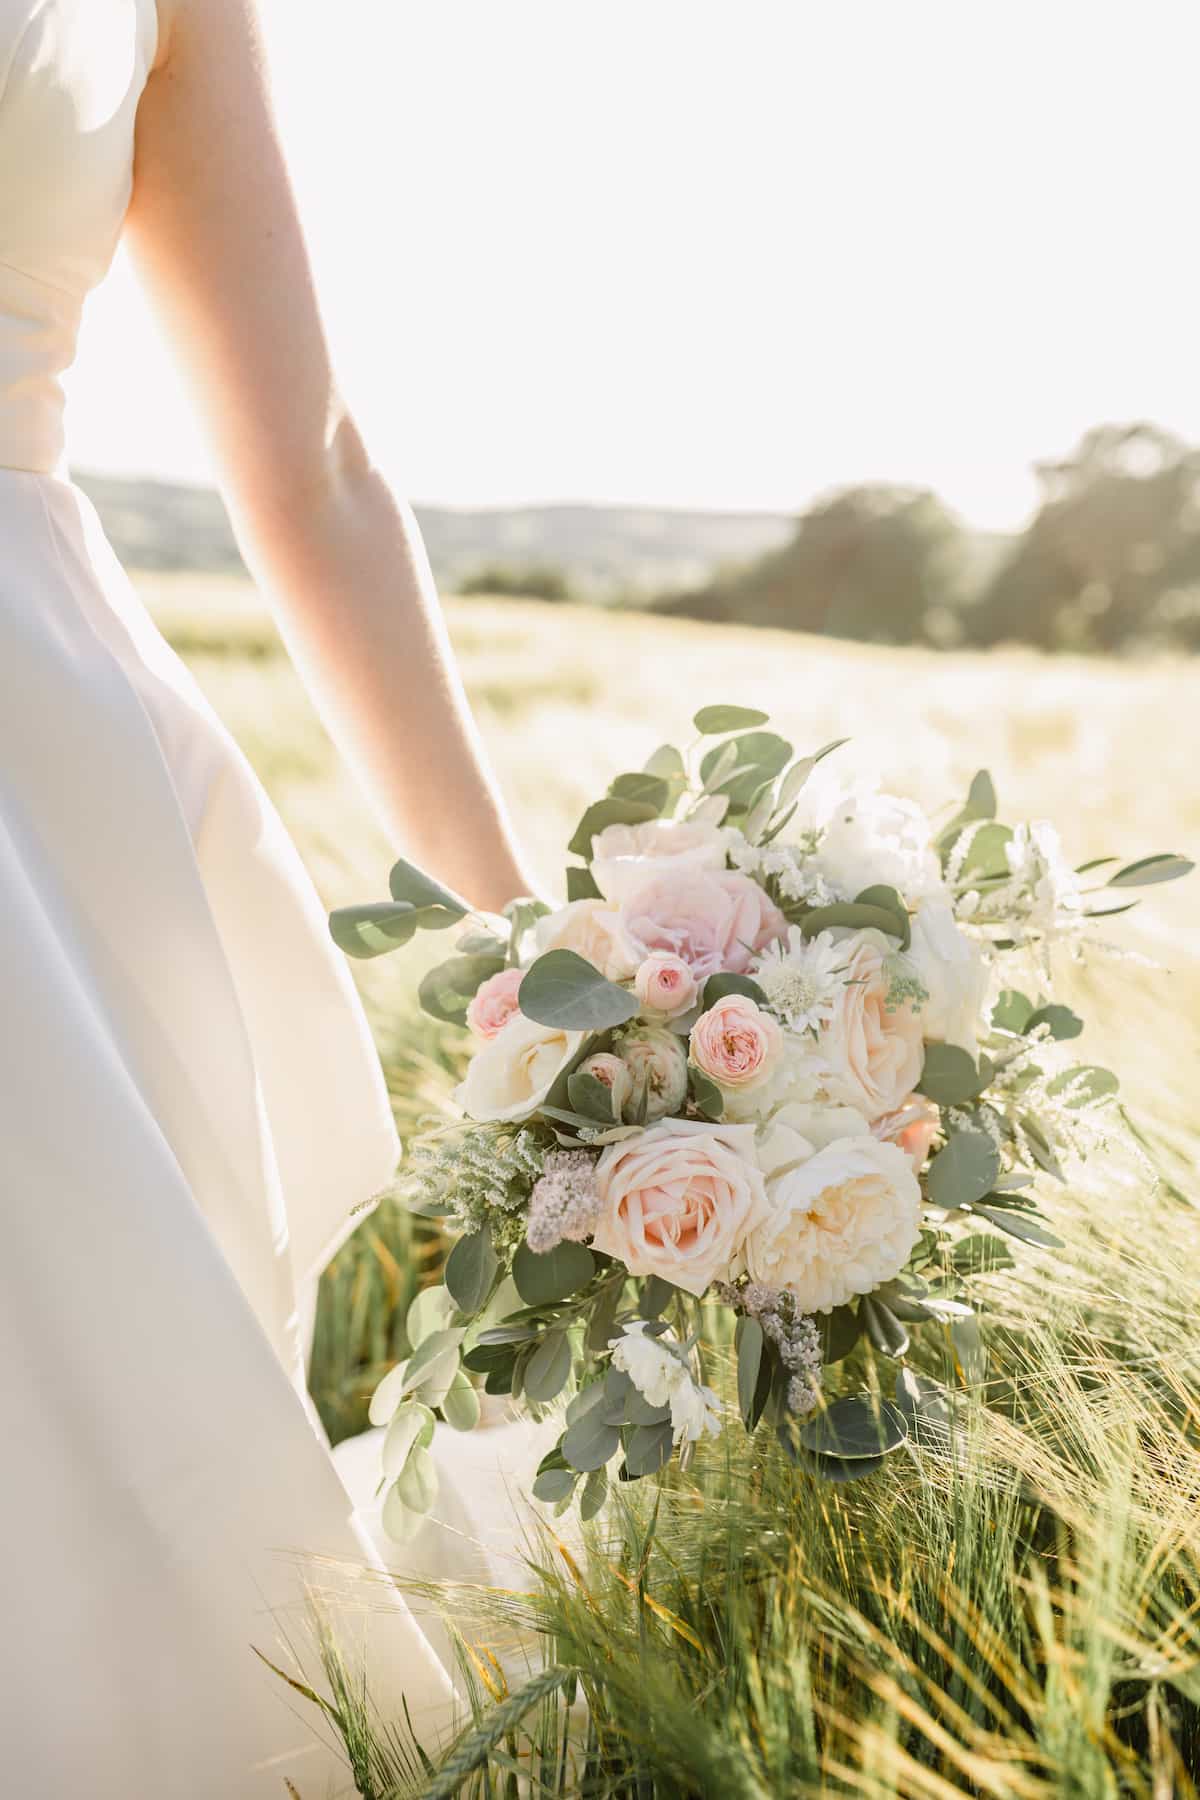 A bride holding a pale pink bouquet in a field